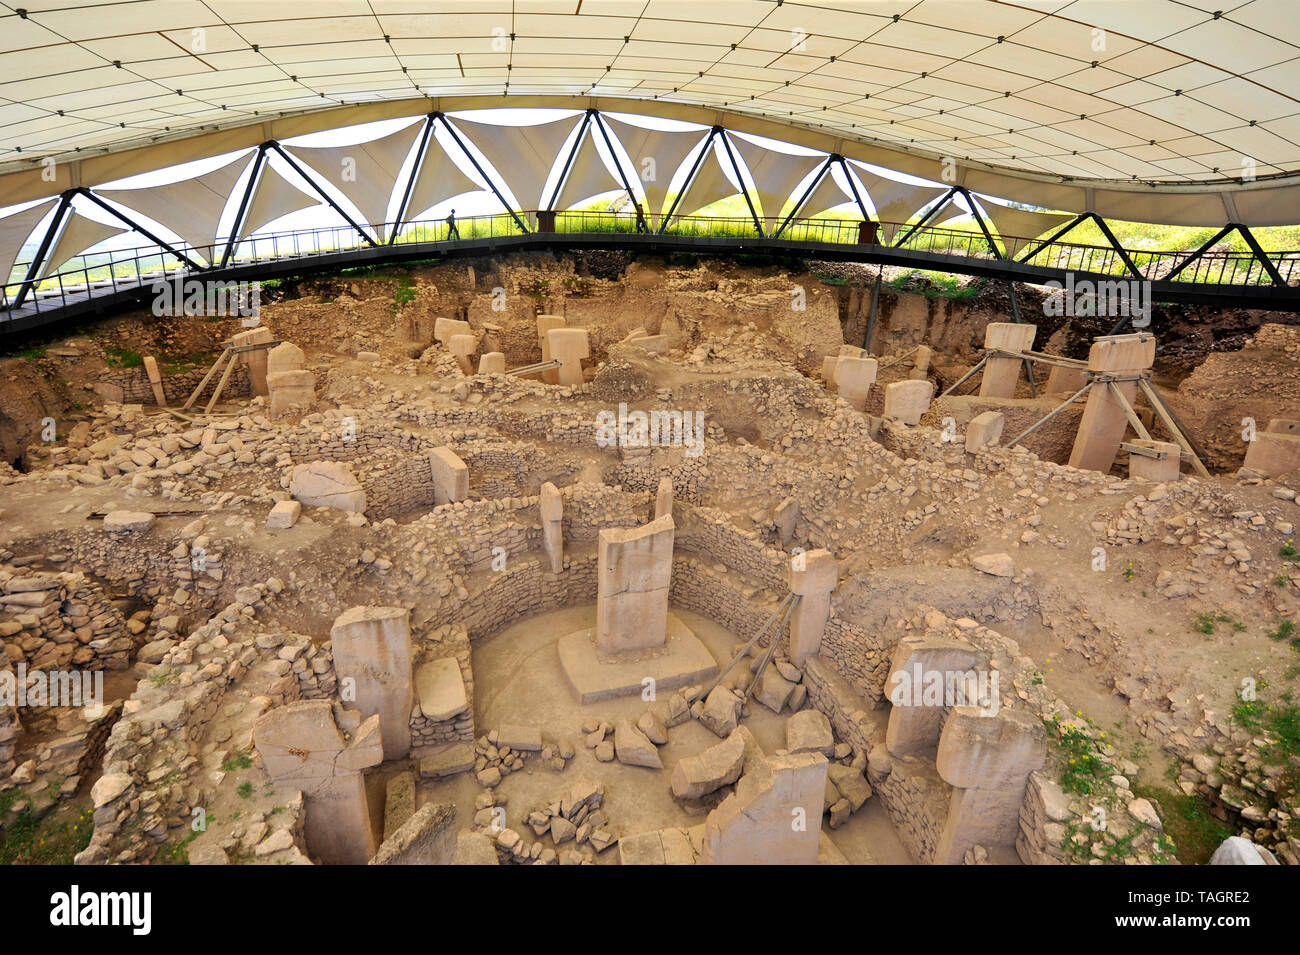 Visitors have view of archaeological excavation of ancient stone ceremonial site at Gobekli Tepe in Sanliurfa, Turkey Stock Photo